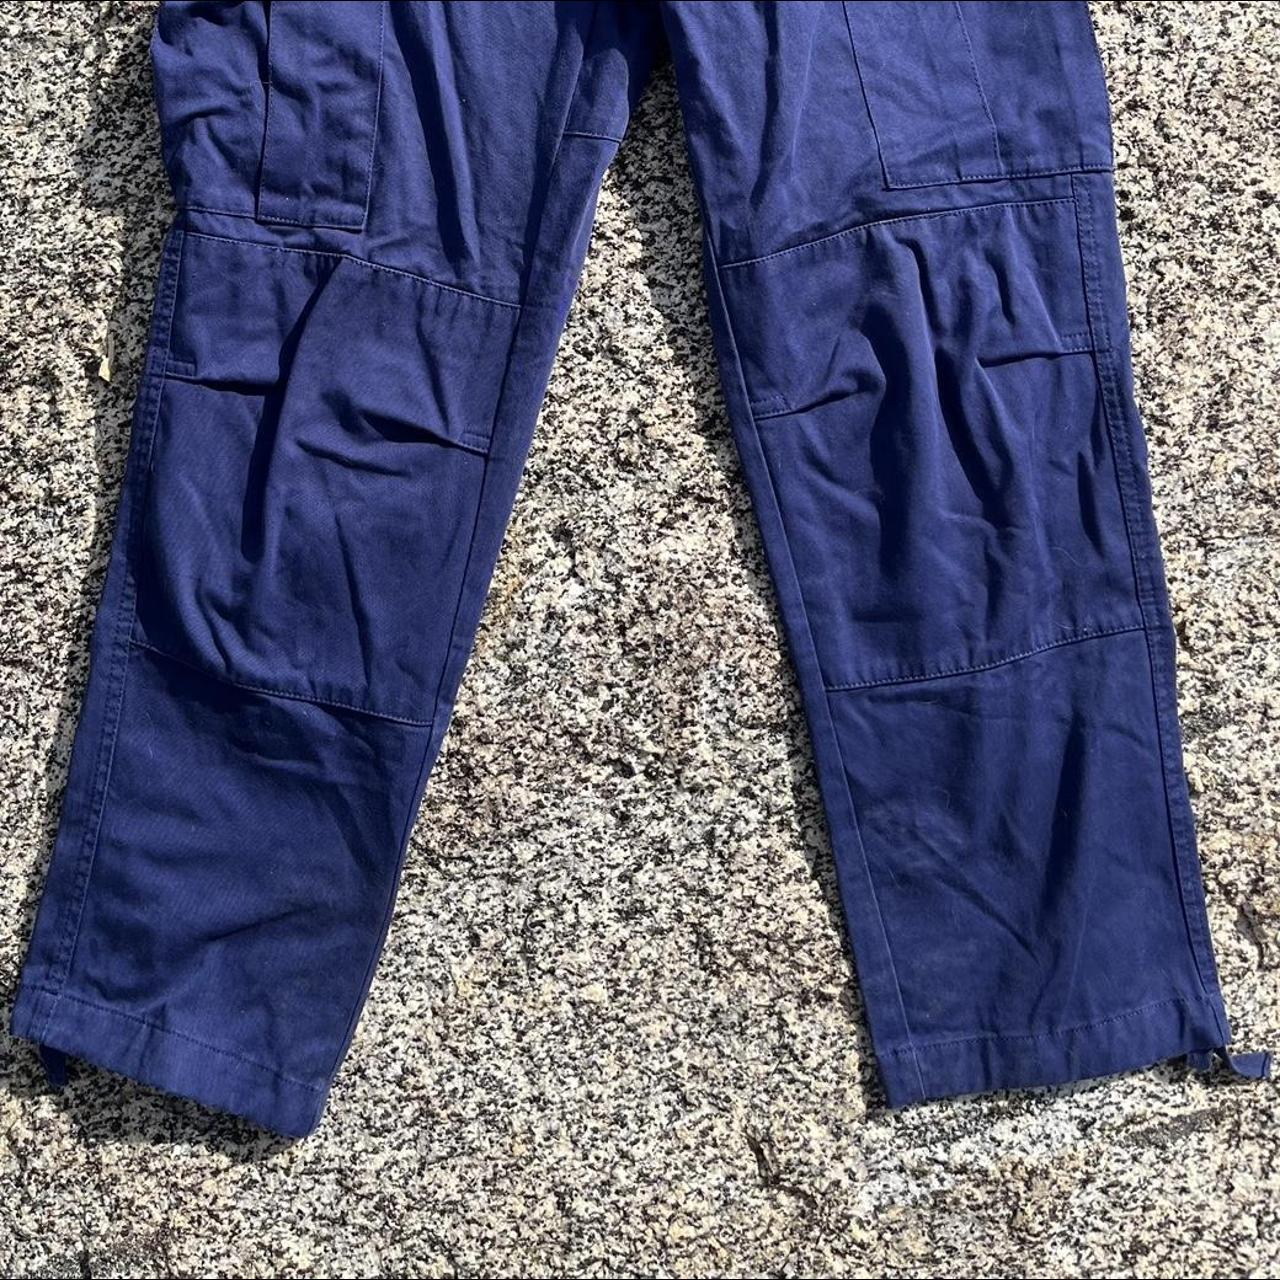 Empyre Men's Navy and Purple Trousers | Depop